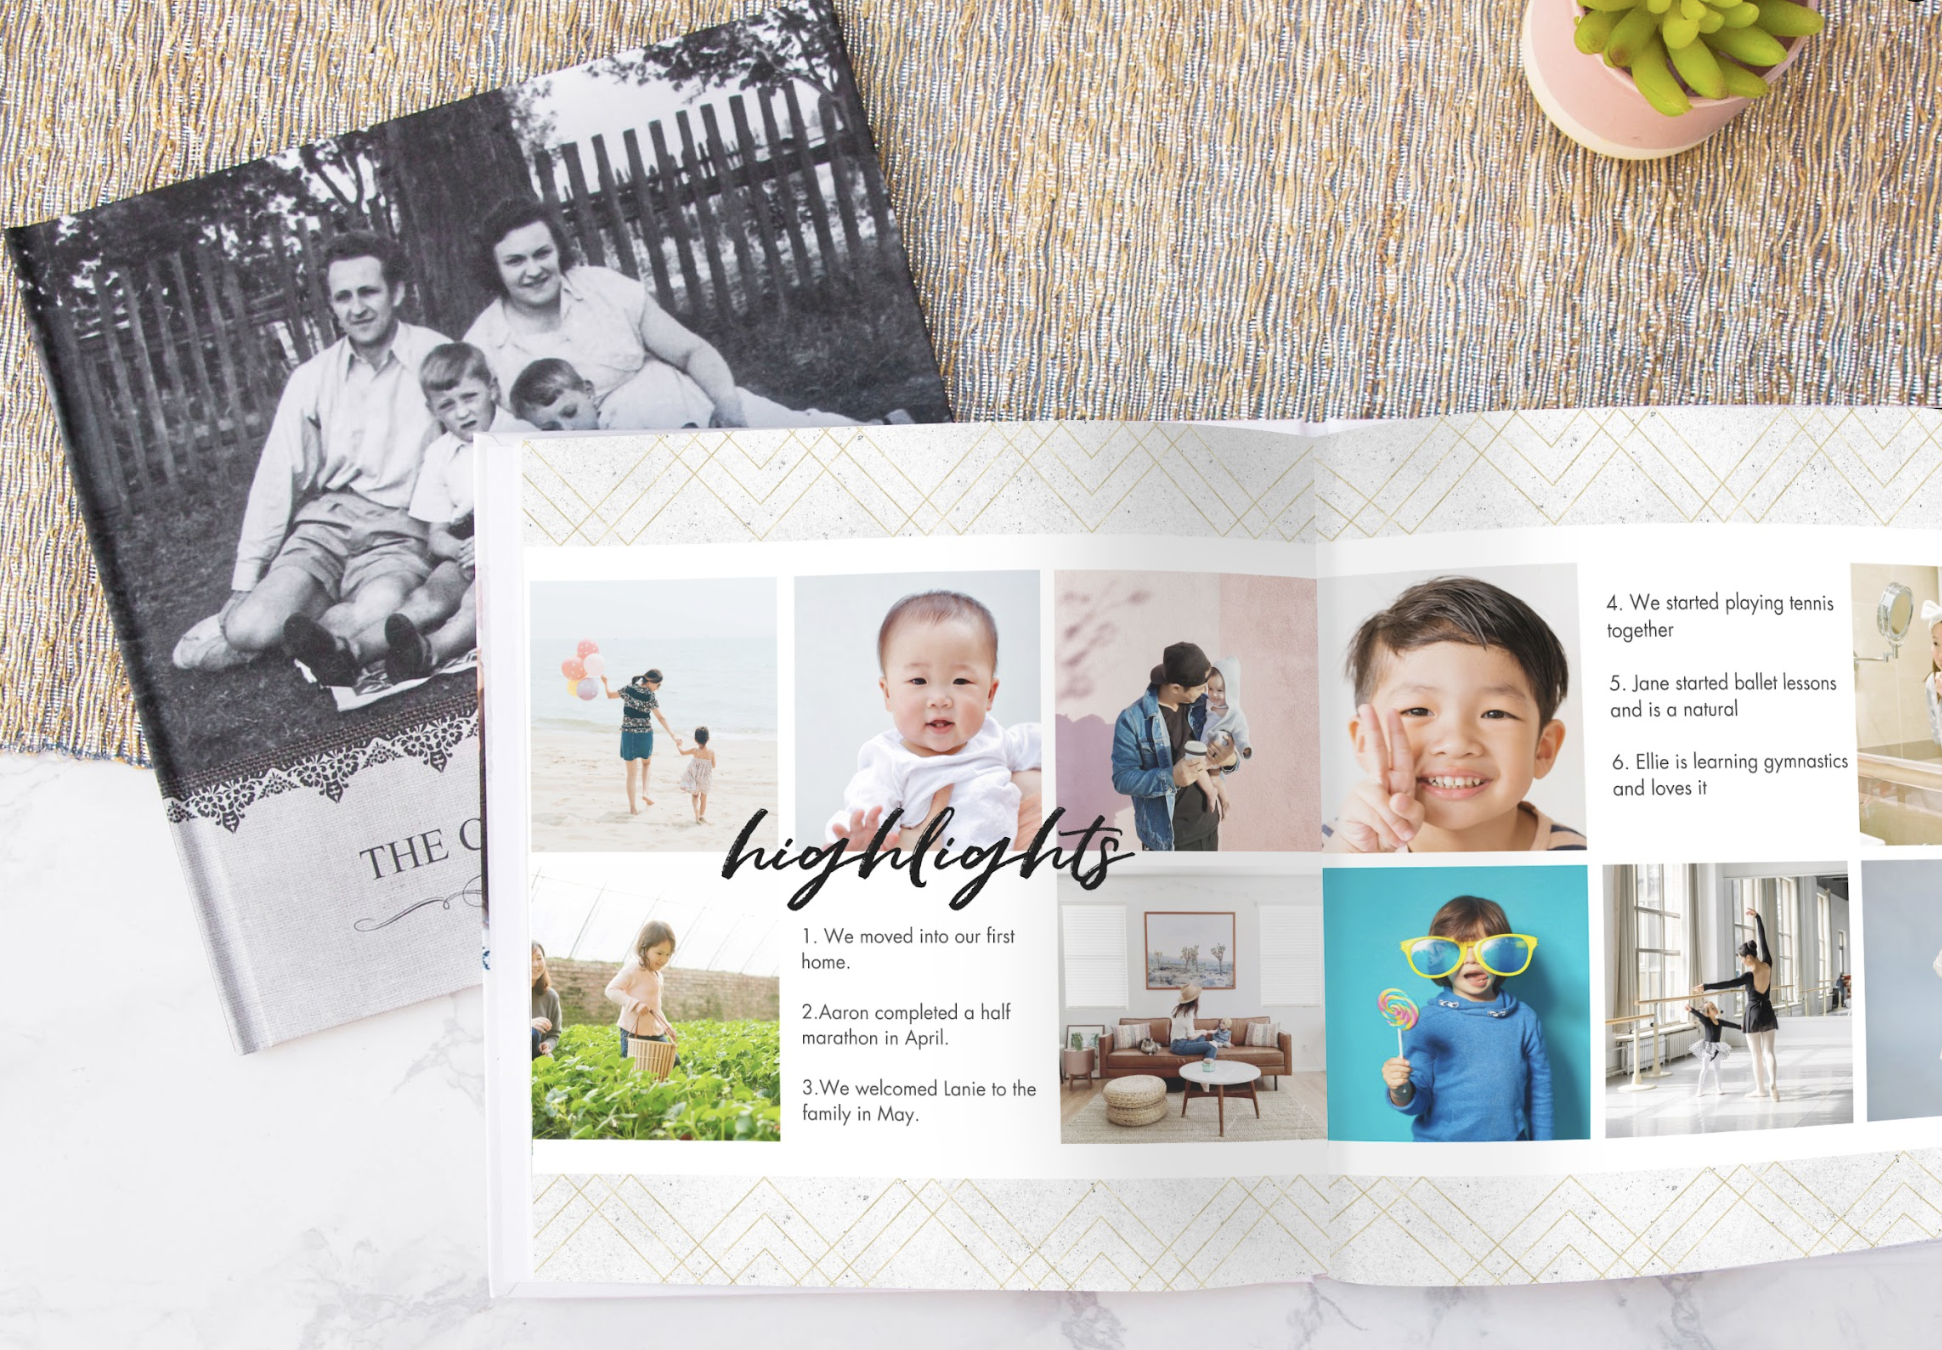 Preserve Your Love Story With This Two-Page Wedding Scrapbook